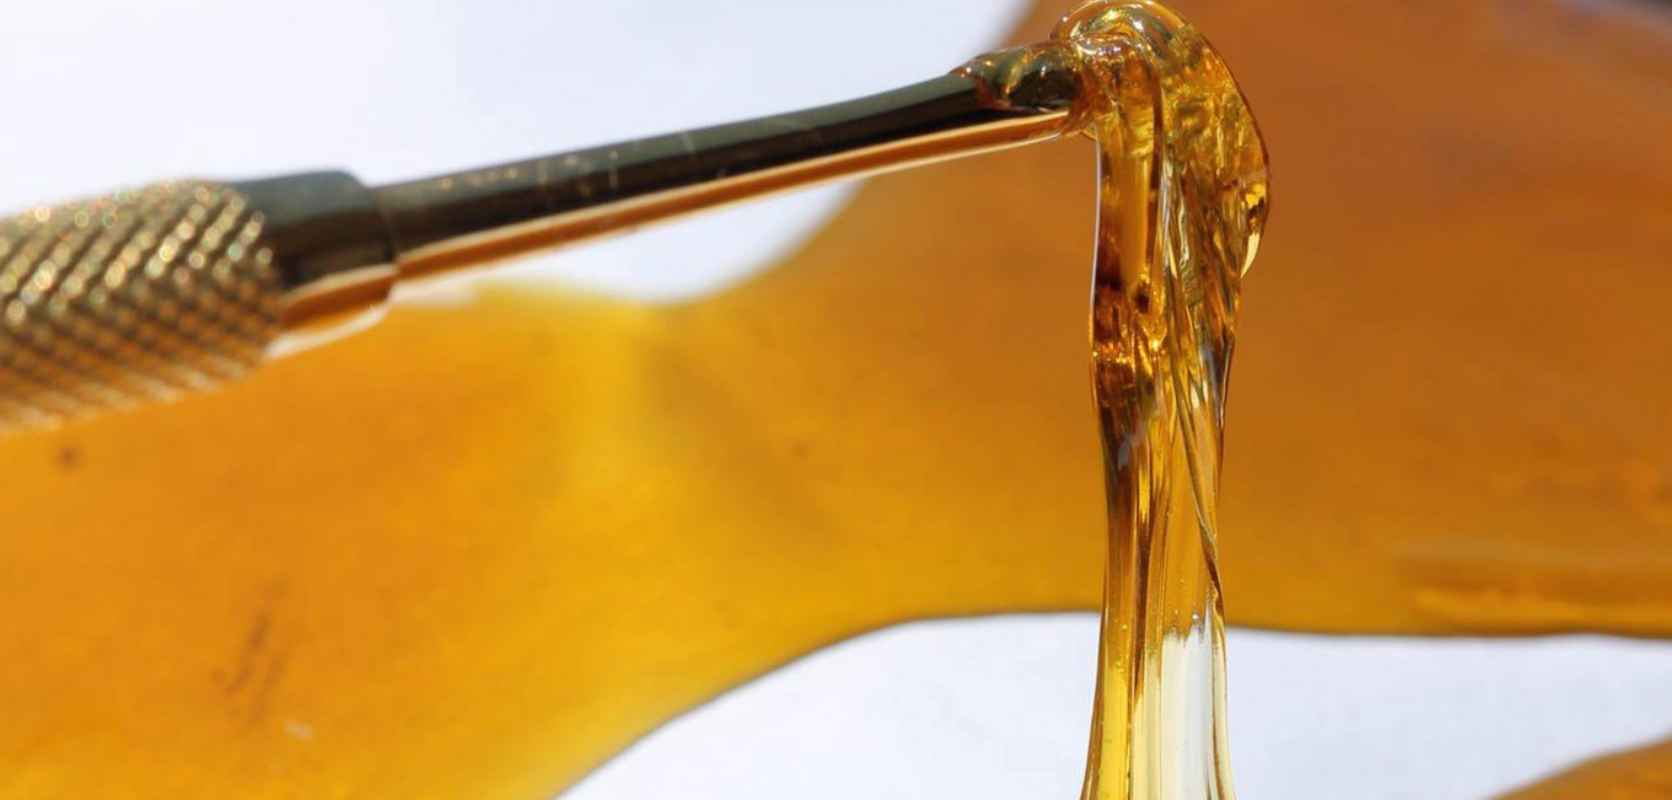 THC Distillate is a cannabis extract carefully separated from unwanted plants and cannabinoid compounds. 